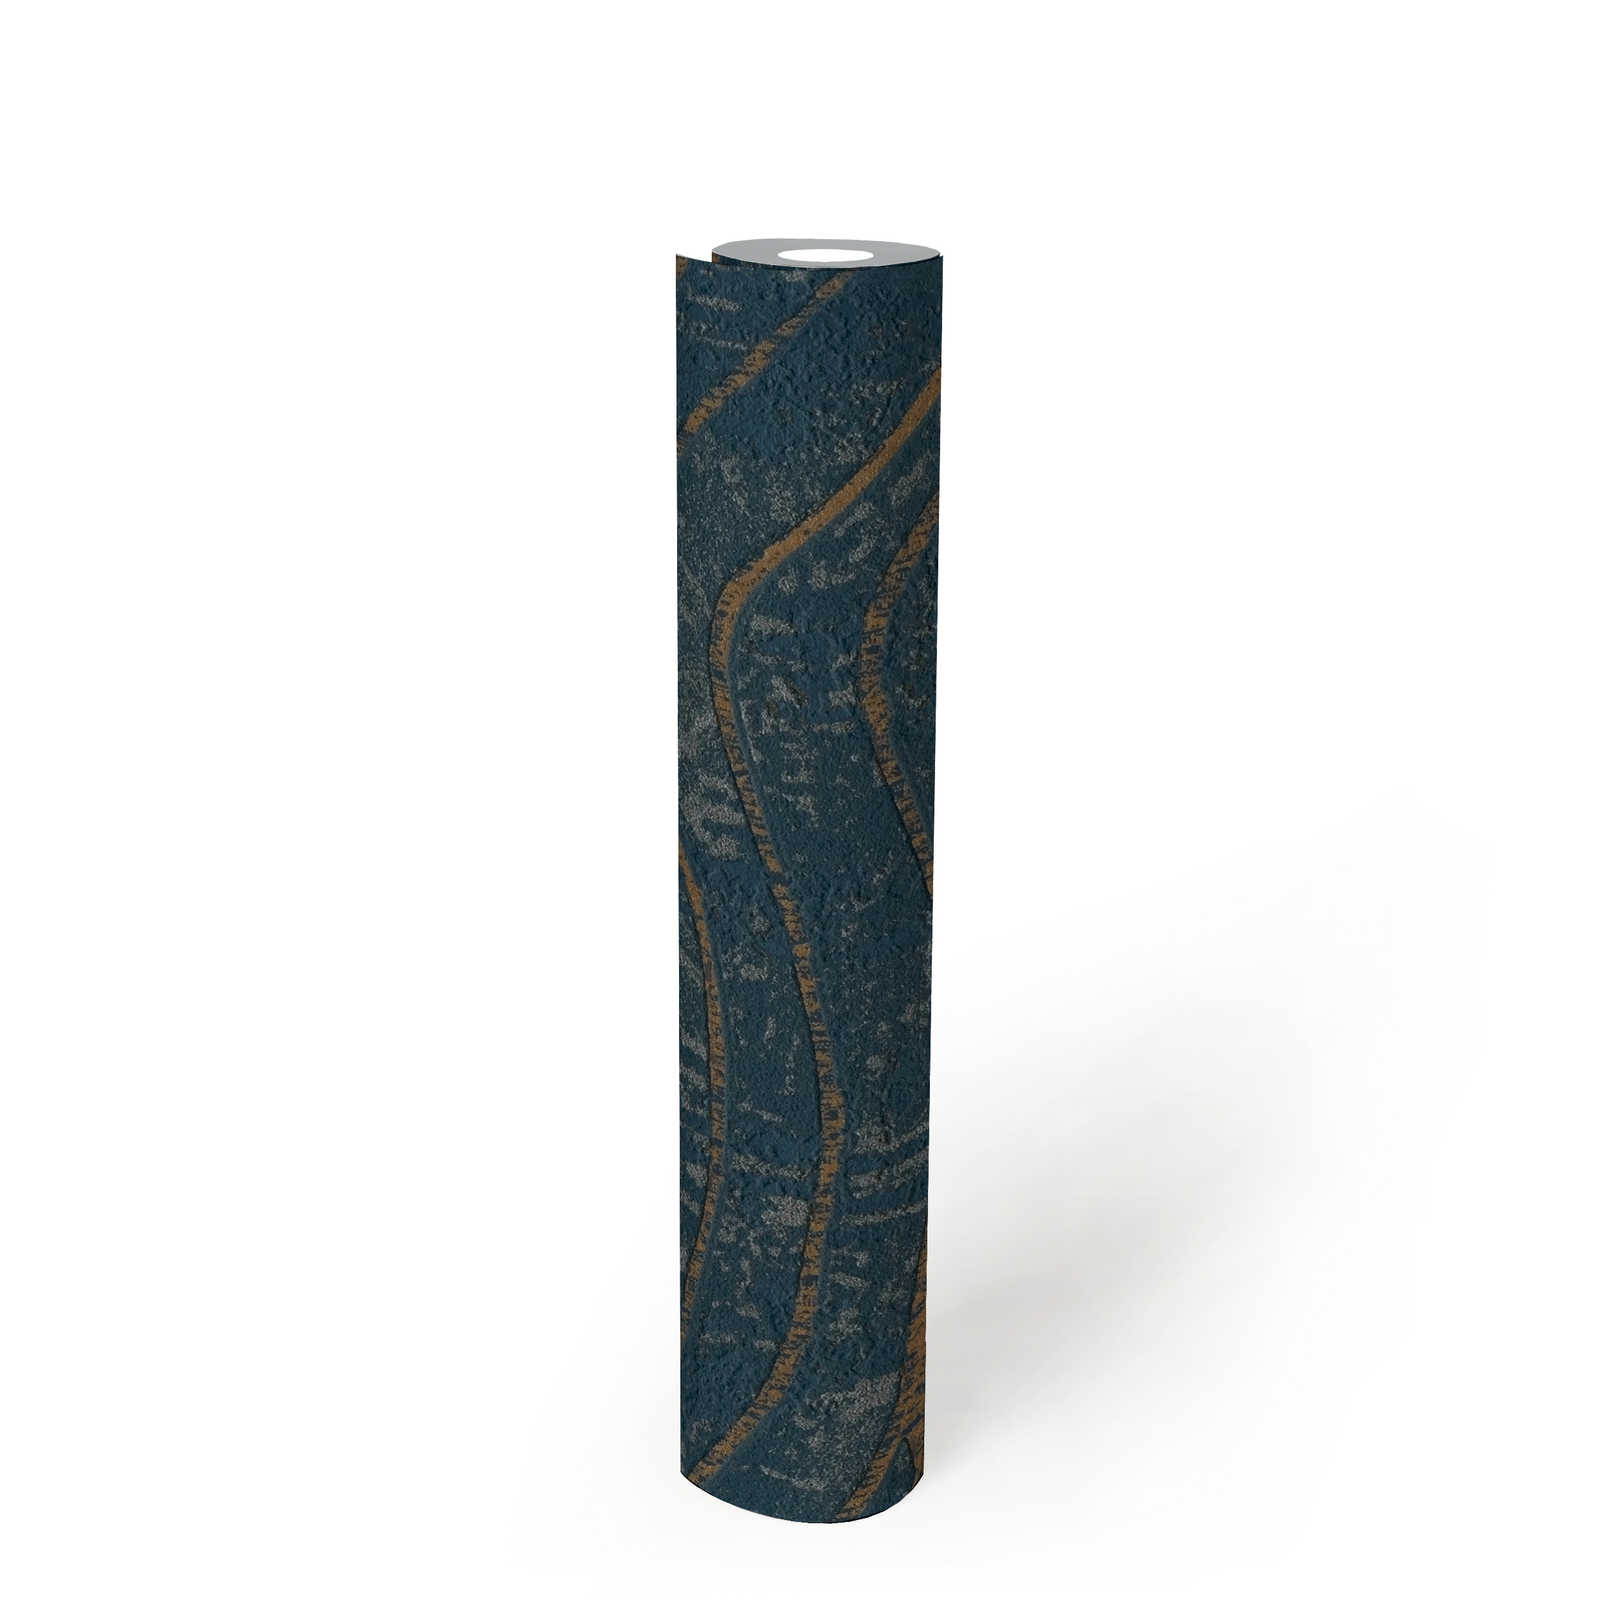             Wallpaper with abstract hill pattern - dark blue, gold
        